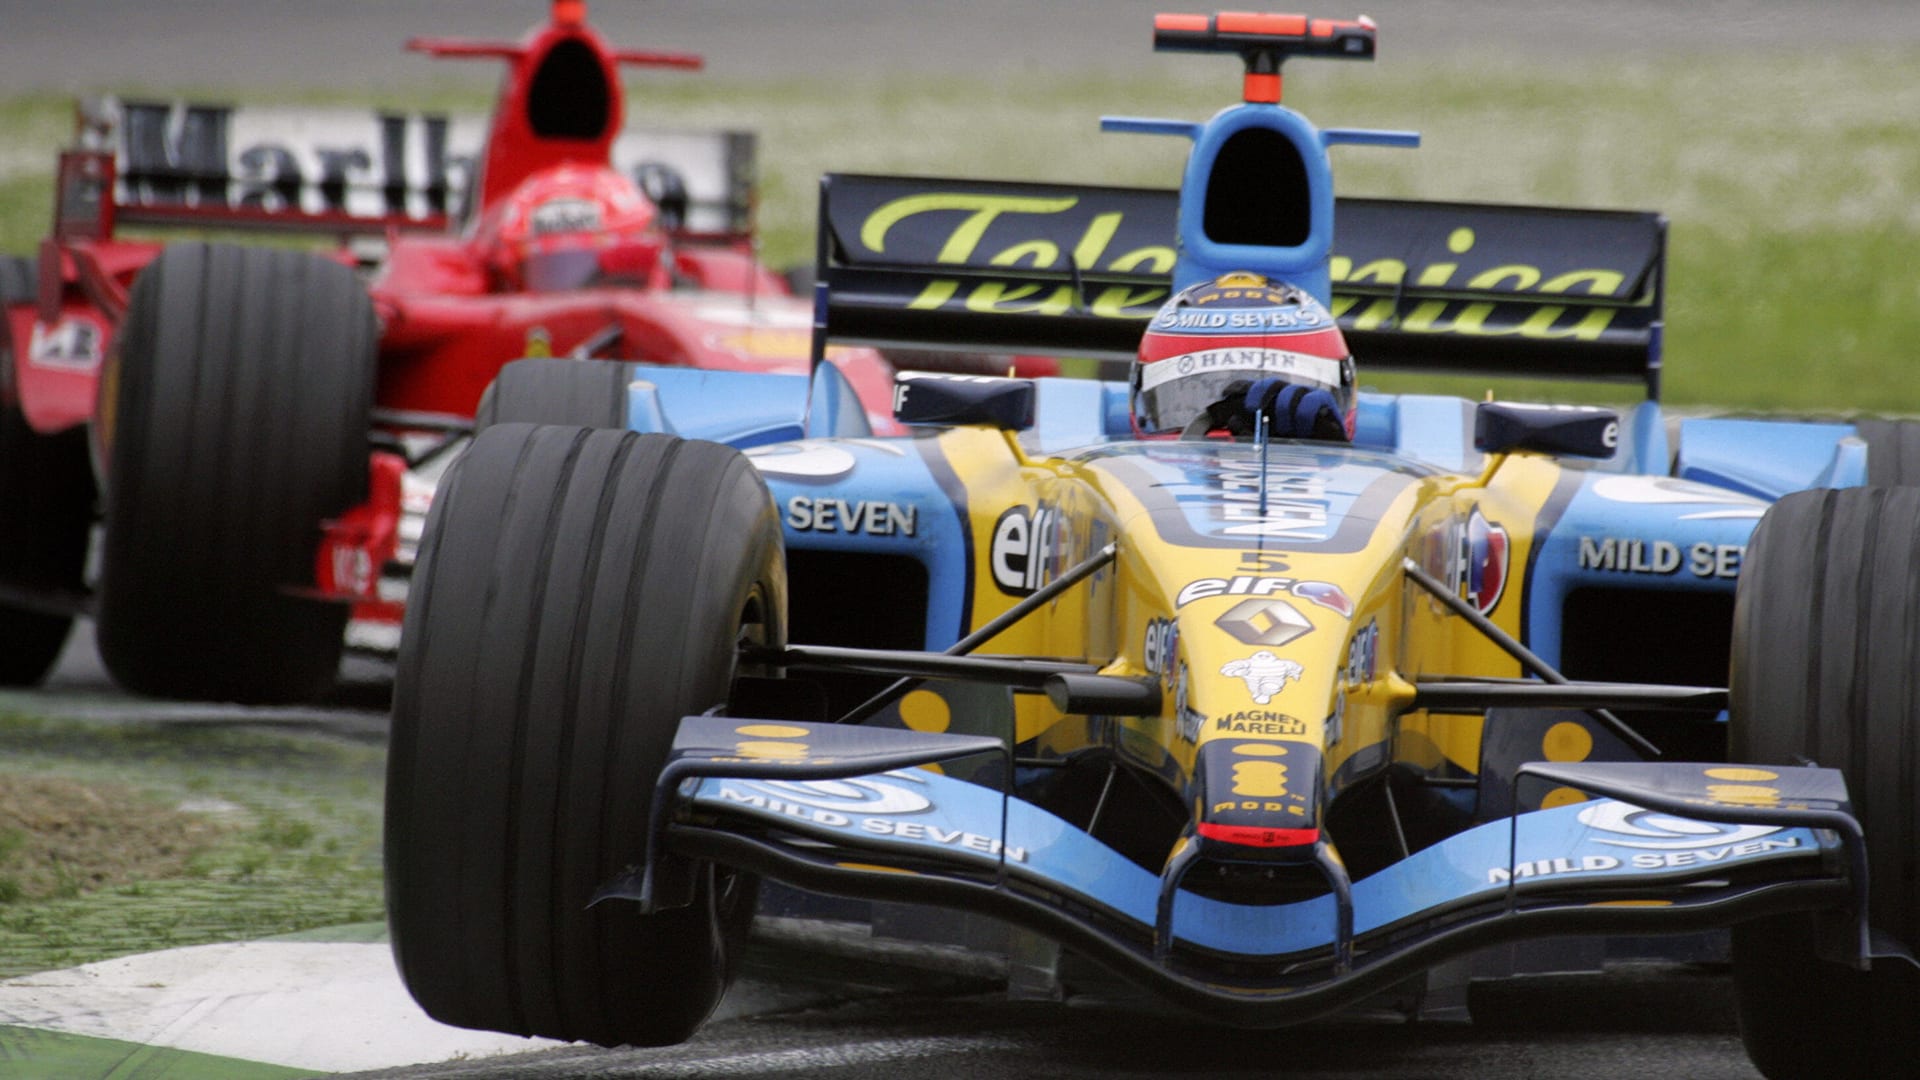 LIVESTREAM Go back in time to 2005 for a classic Alonso vs Schumacher battle at Imola Formula 1®